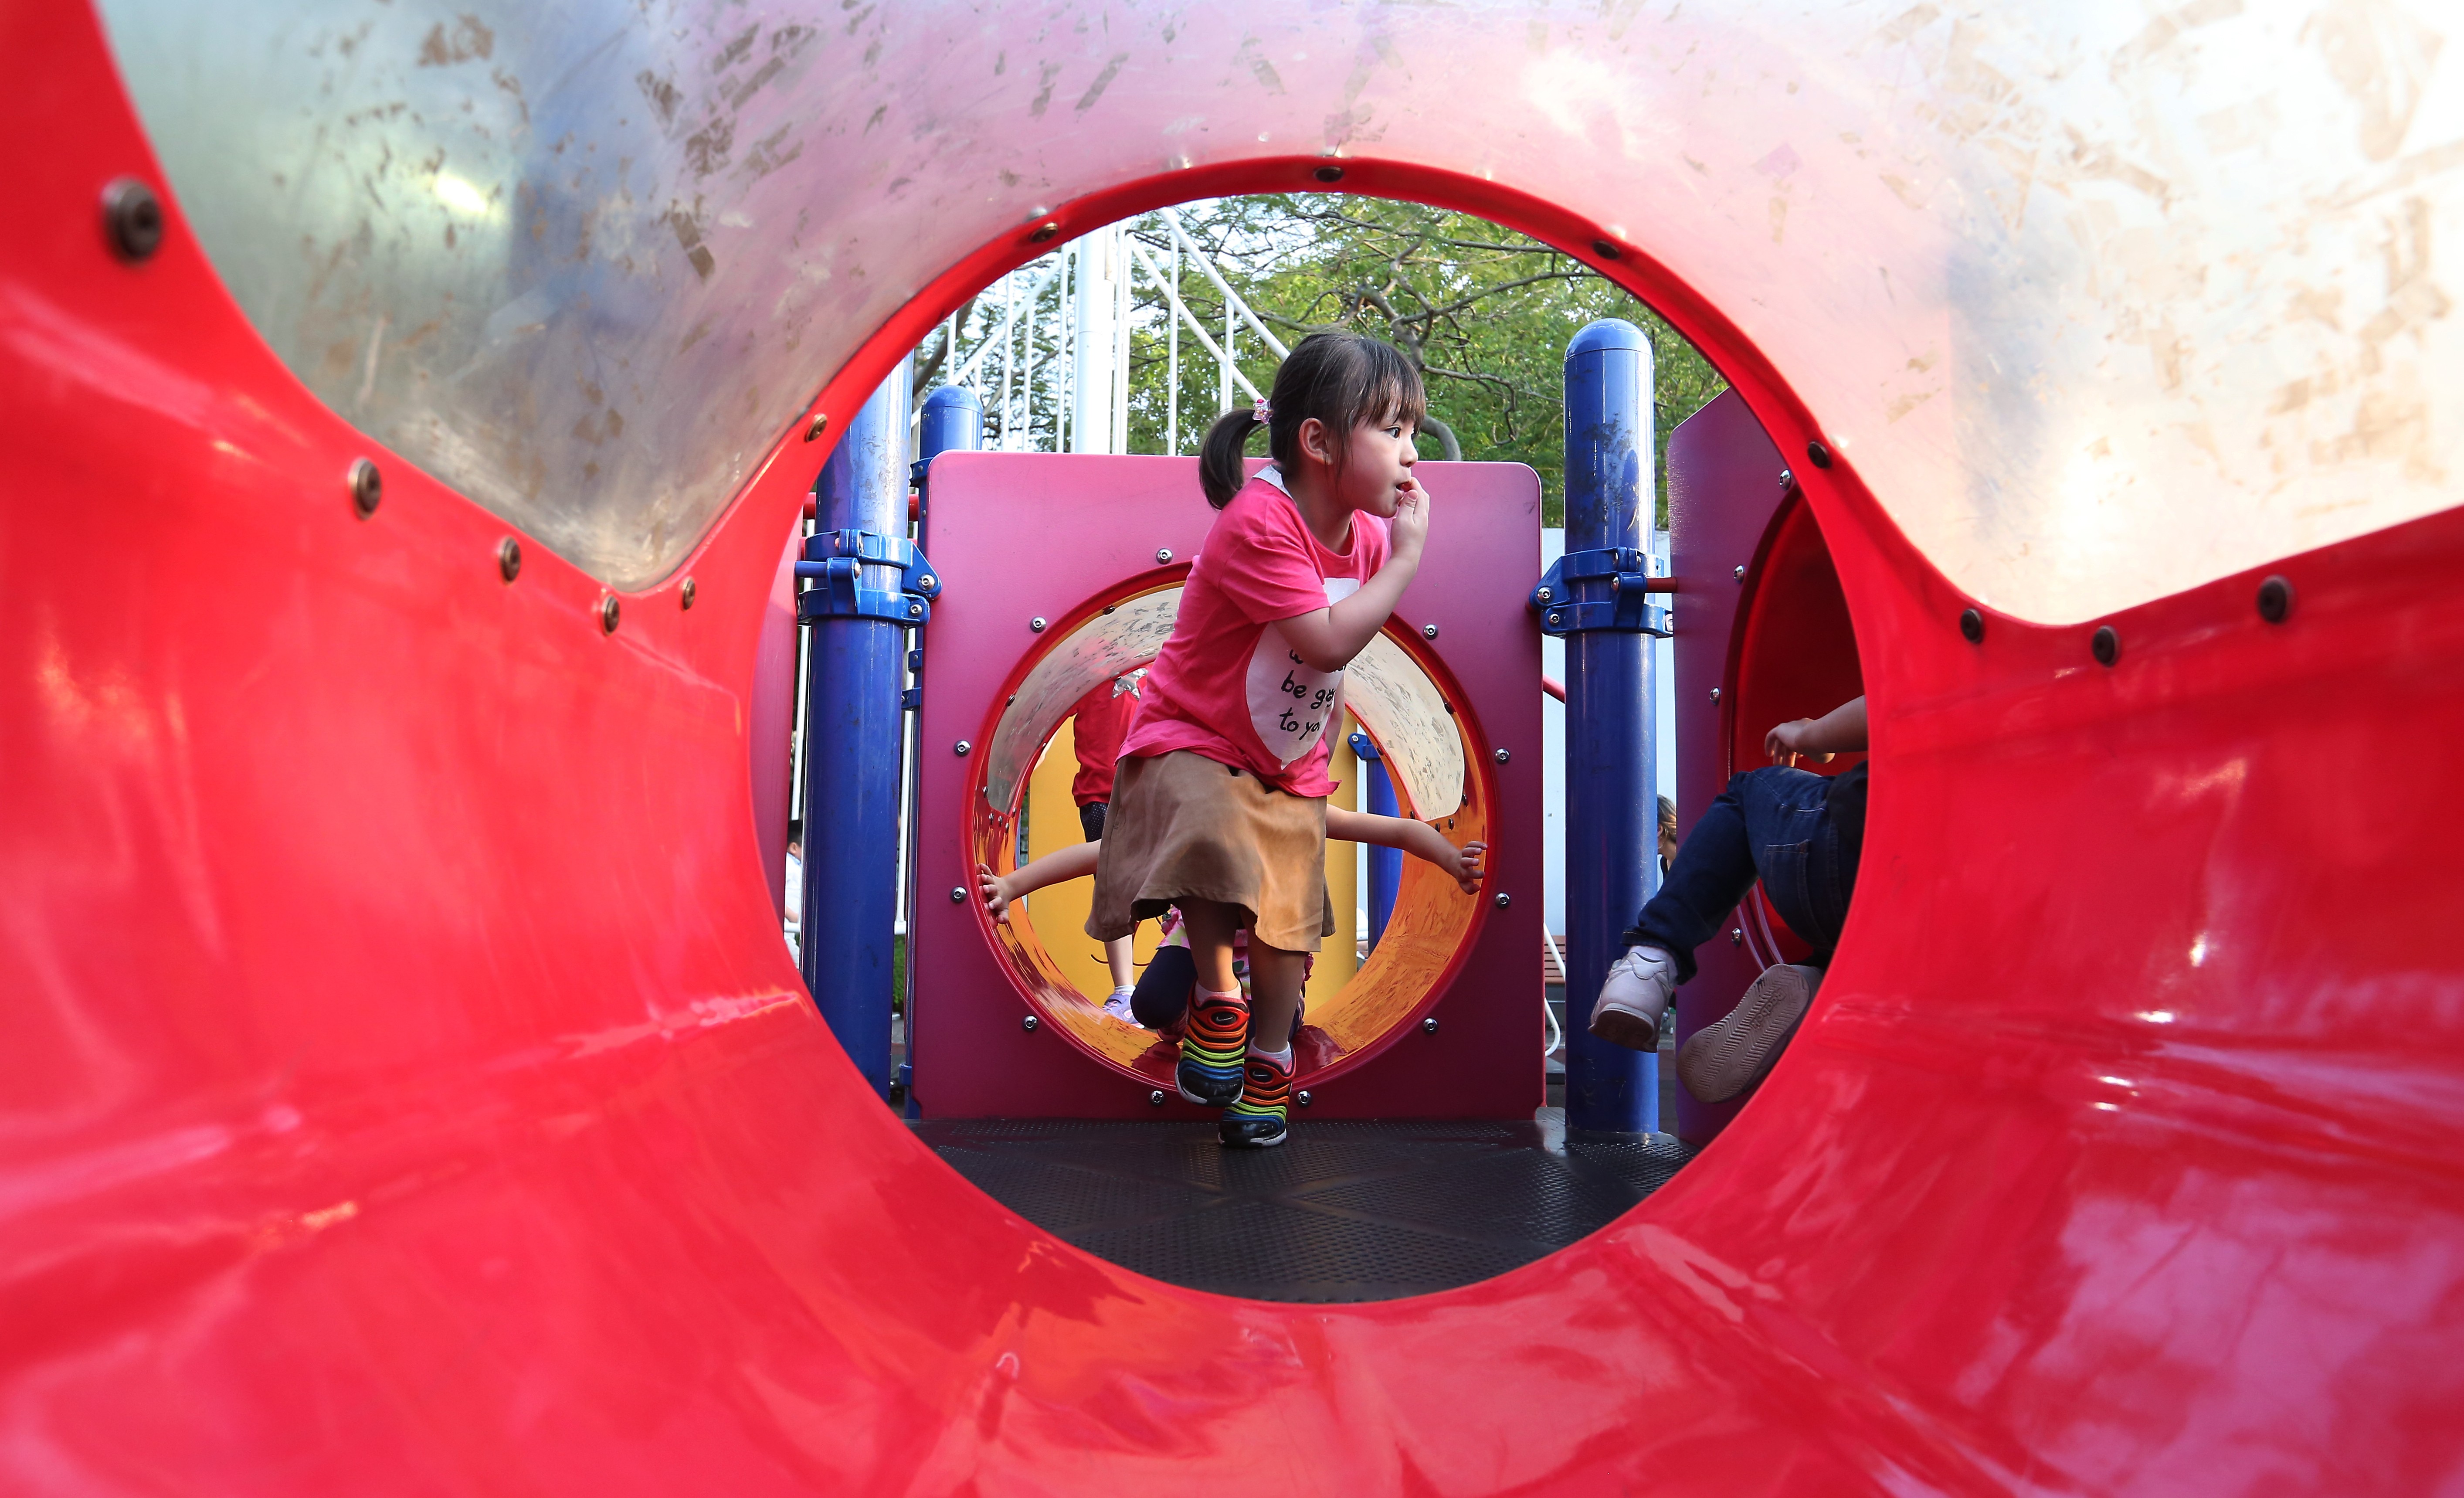 Hong Kong officials have been said to apply a risk management model to the city’s public playgrounds. Photo: Edmond So